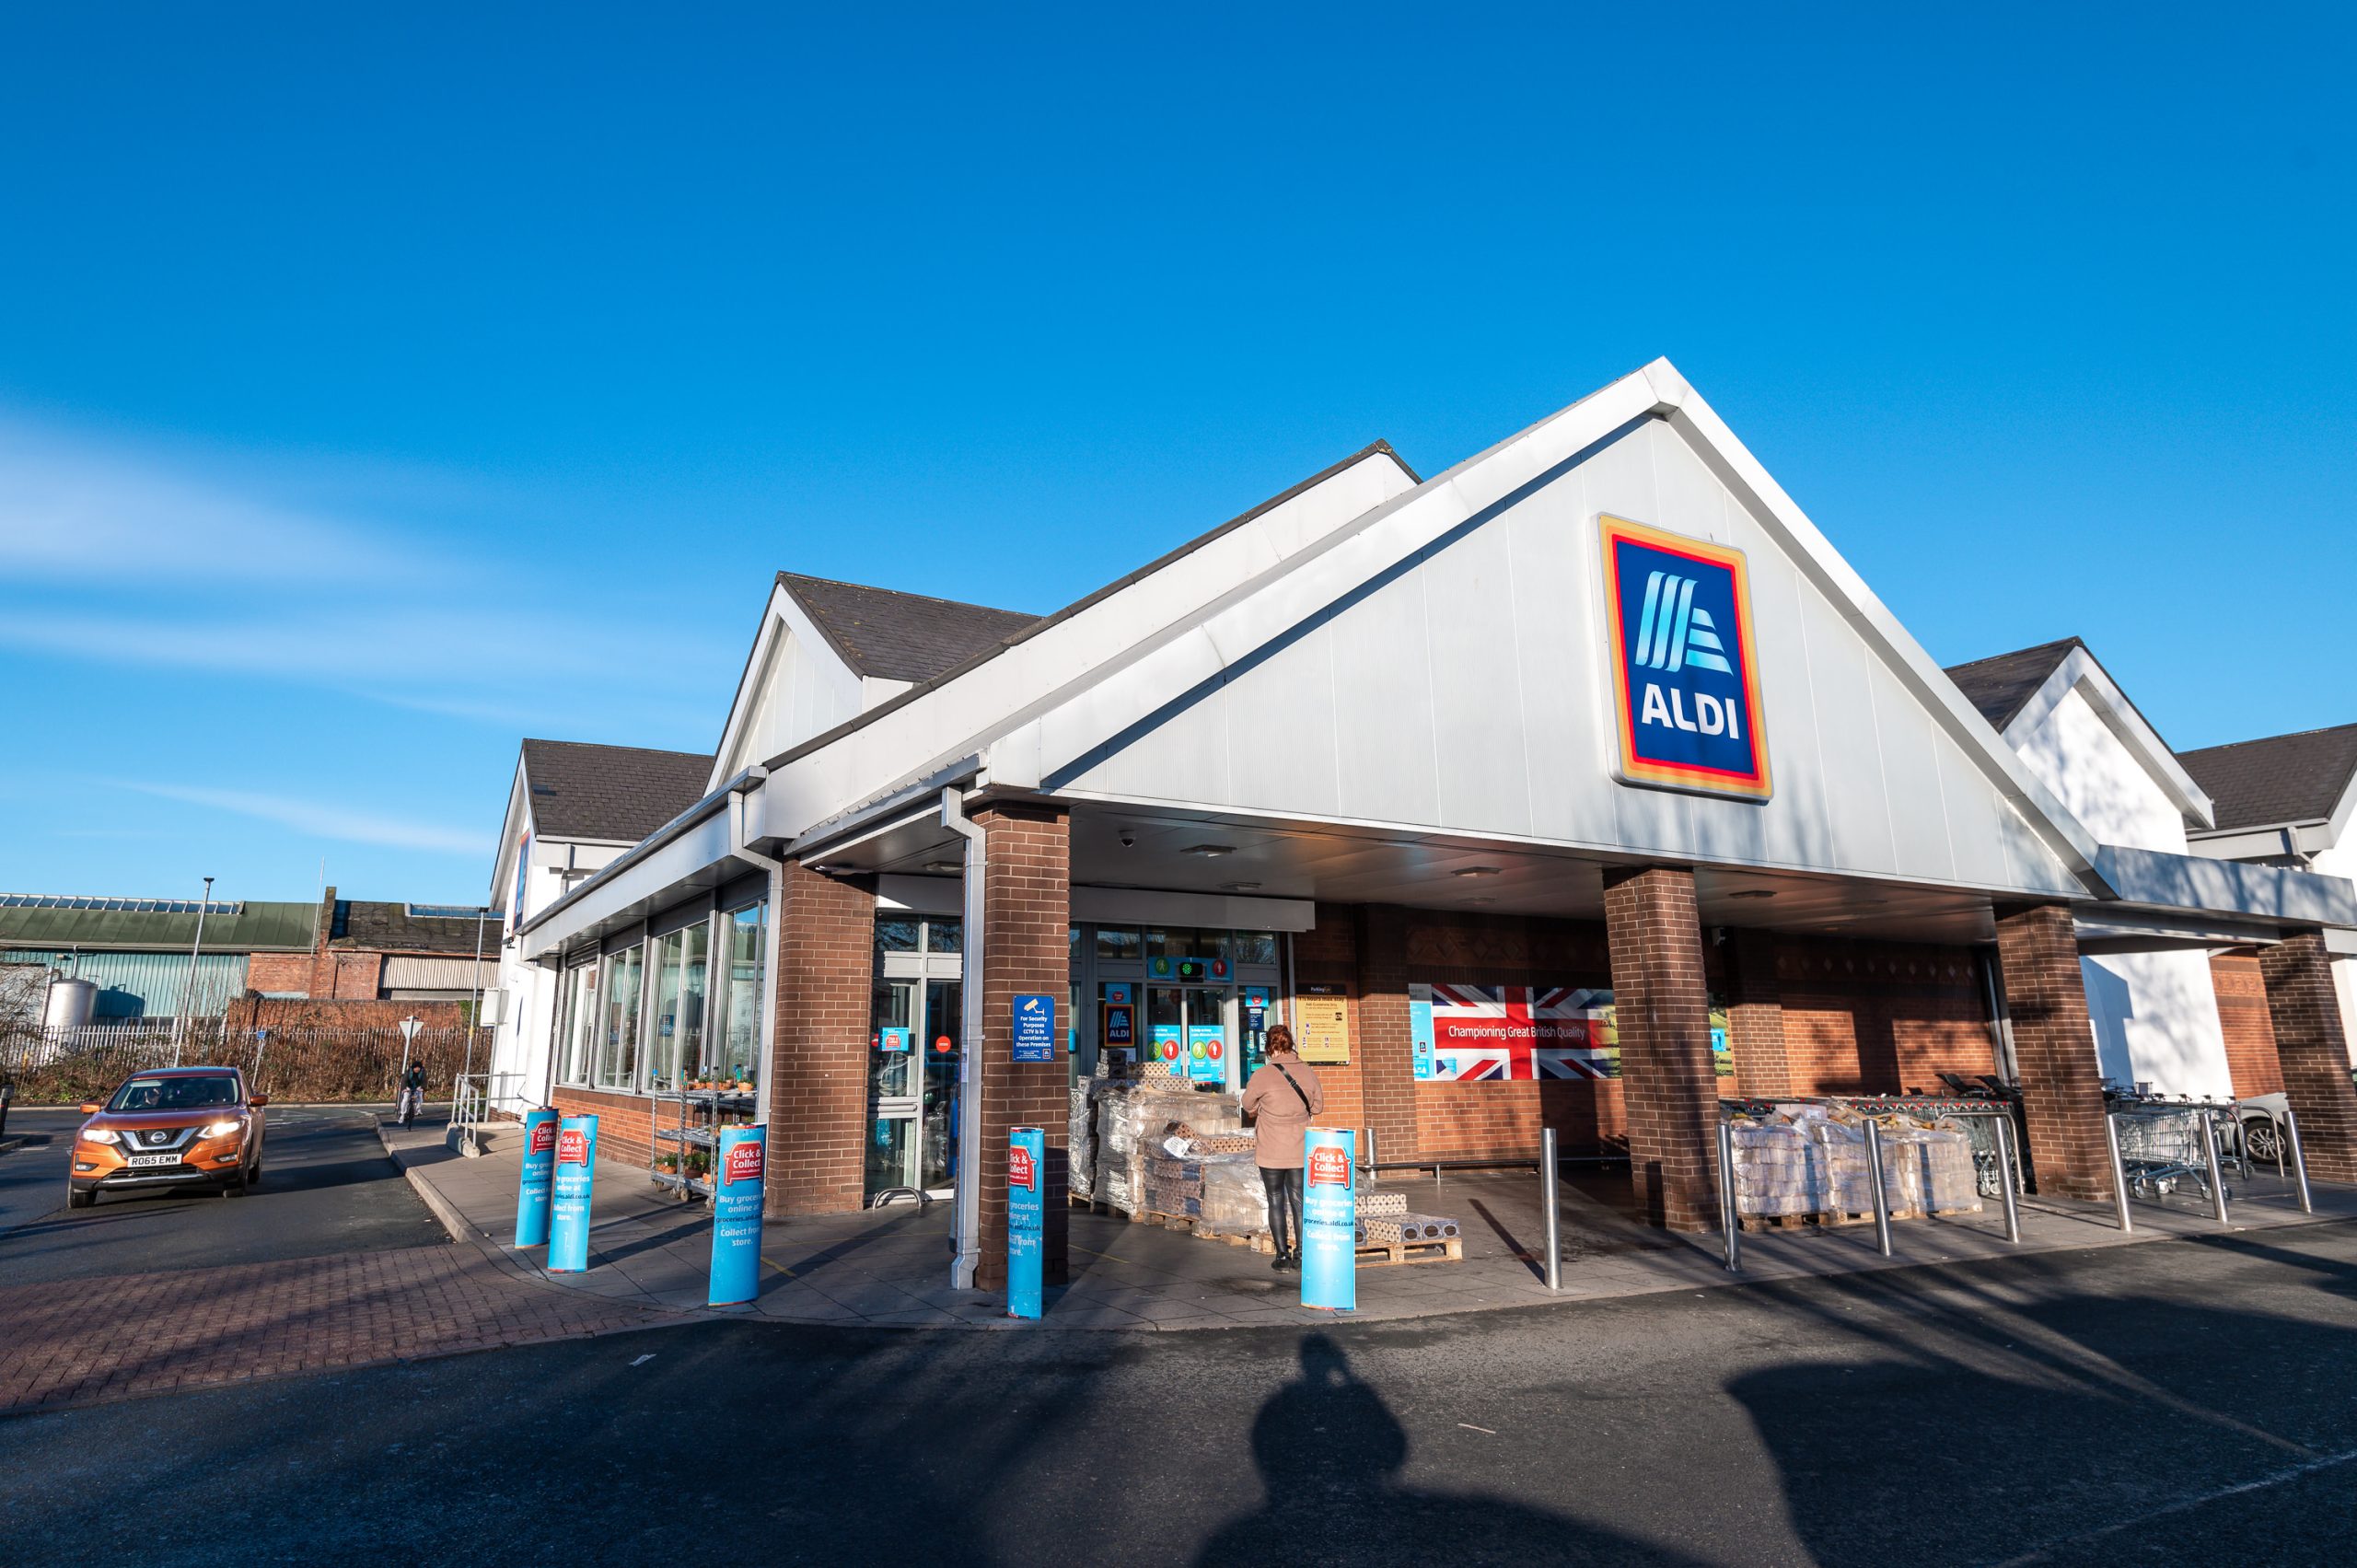 NEWS | Aldi, Tesco and Greggs are the latest retailers to recall food items over safety concerns